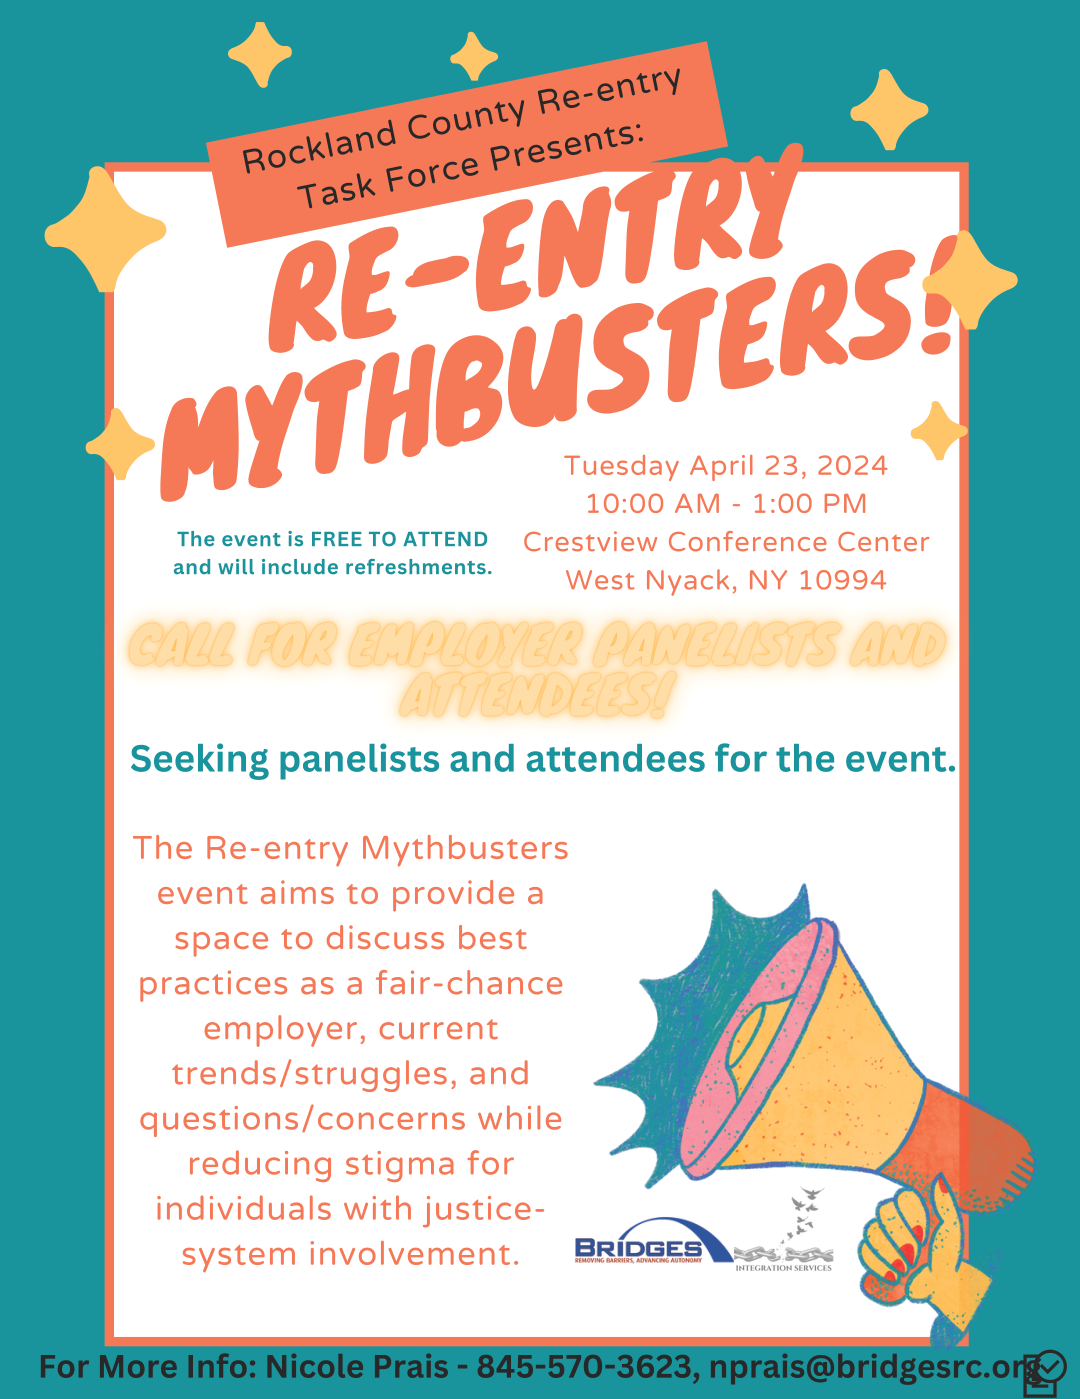 Rockland County Re-entry Task Force Presents: Re-entry Mythbusters. Tuesday, April 23, 2024 from 10 AM to 1 PM. Crestview Conference Center, West Nyack, NY 10994. This event is free to attend and will include refreshments. The Re-Entry Mythbusters event aims to provide a space to discuss best practices as a fair-chance employer, current trends and struggles, and questions and concerns while reducing stigma for individuals with justice-system involvement. Call for employer panelists and attendees. Seeking panelists and attendees for the event. For more information, contact Nicole Prias at 845-570-3623 or NPrais@BridgesRC.org